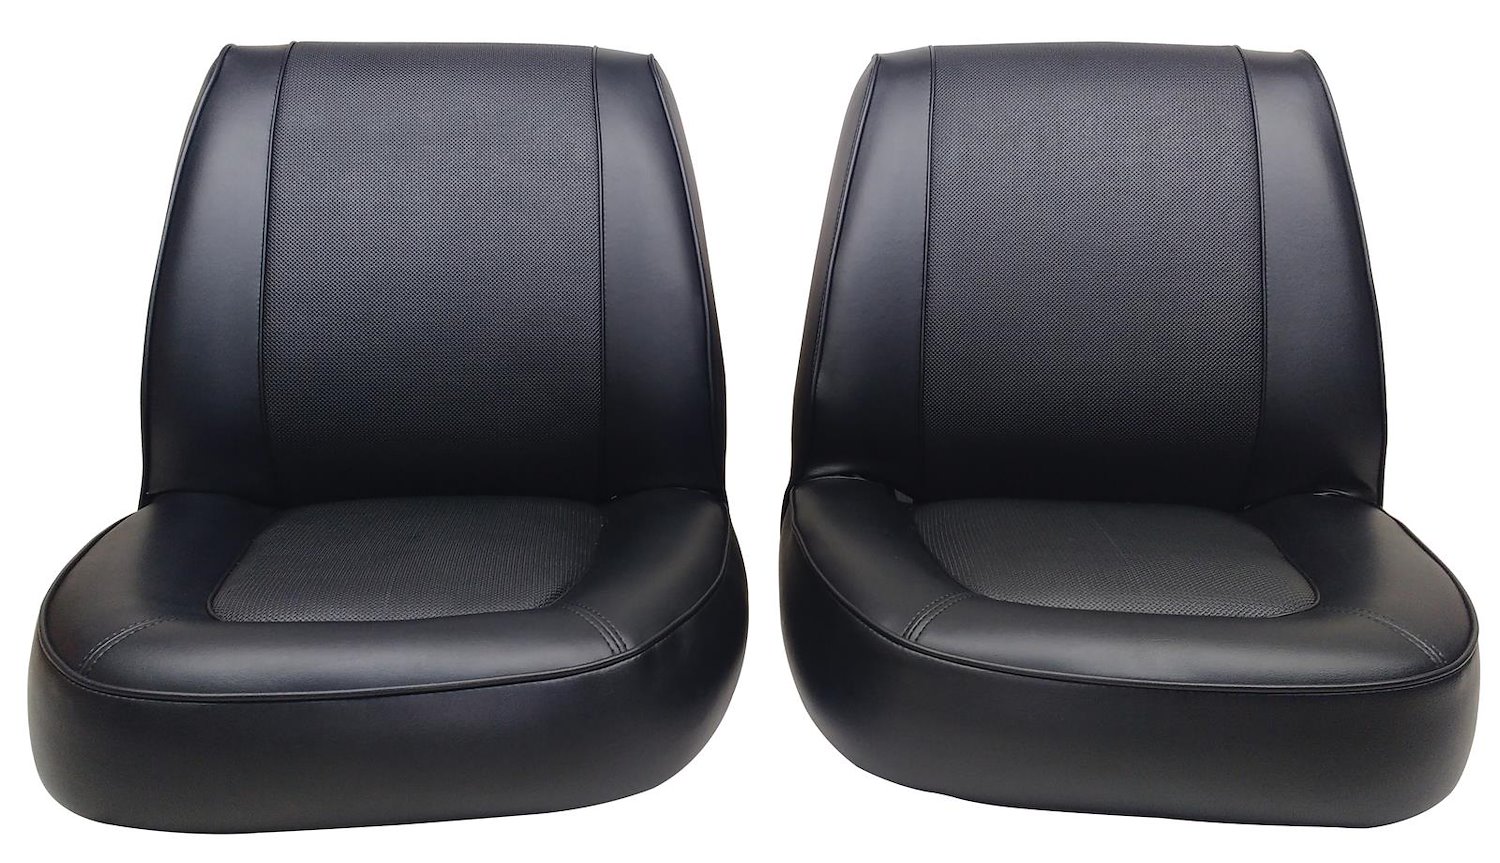 1966-1967 Ford Econoline Falcon Deluxe Club Wagon Two-Tone Interior Front Bucket Seat Upholstery Set for models equipped with fo